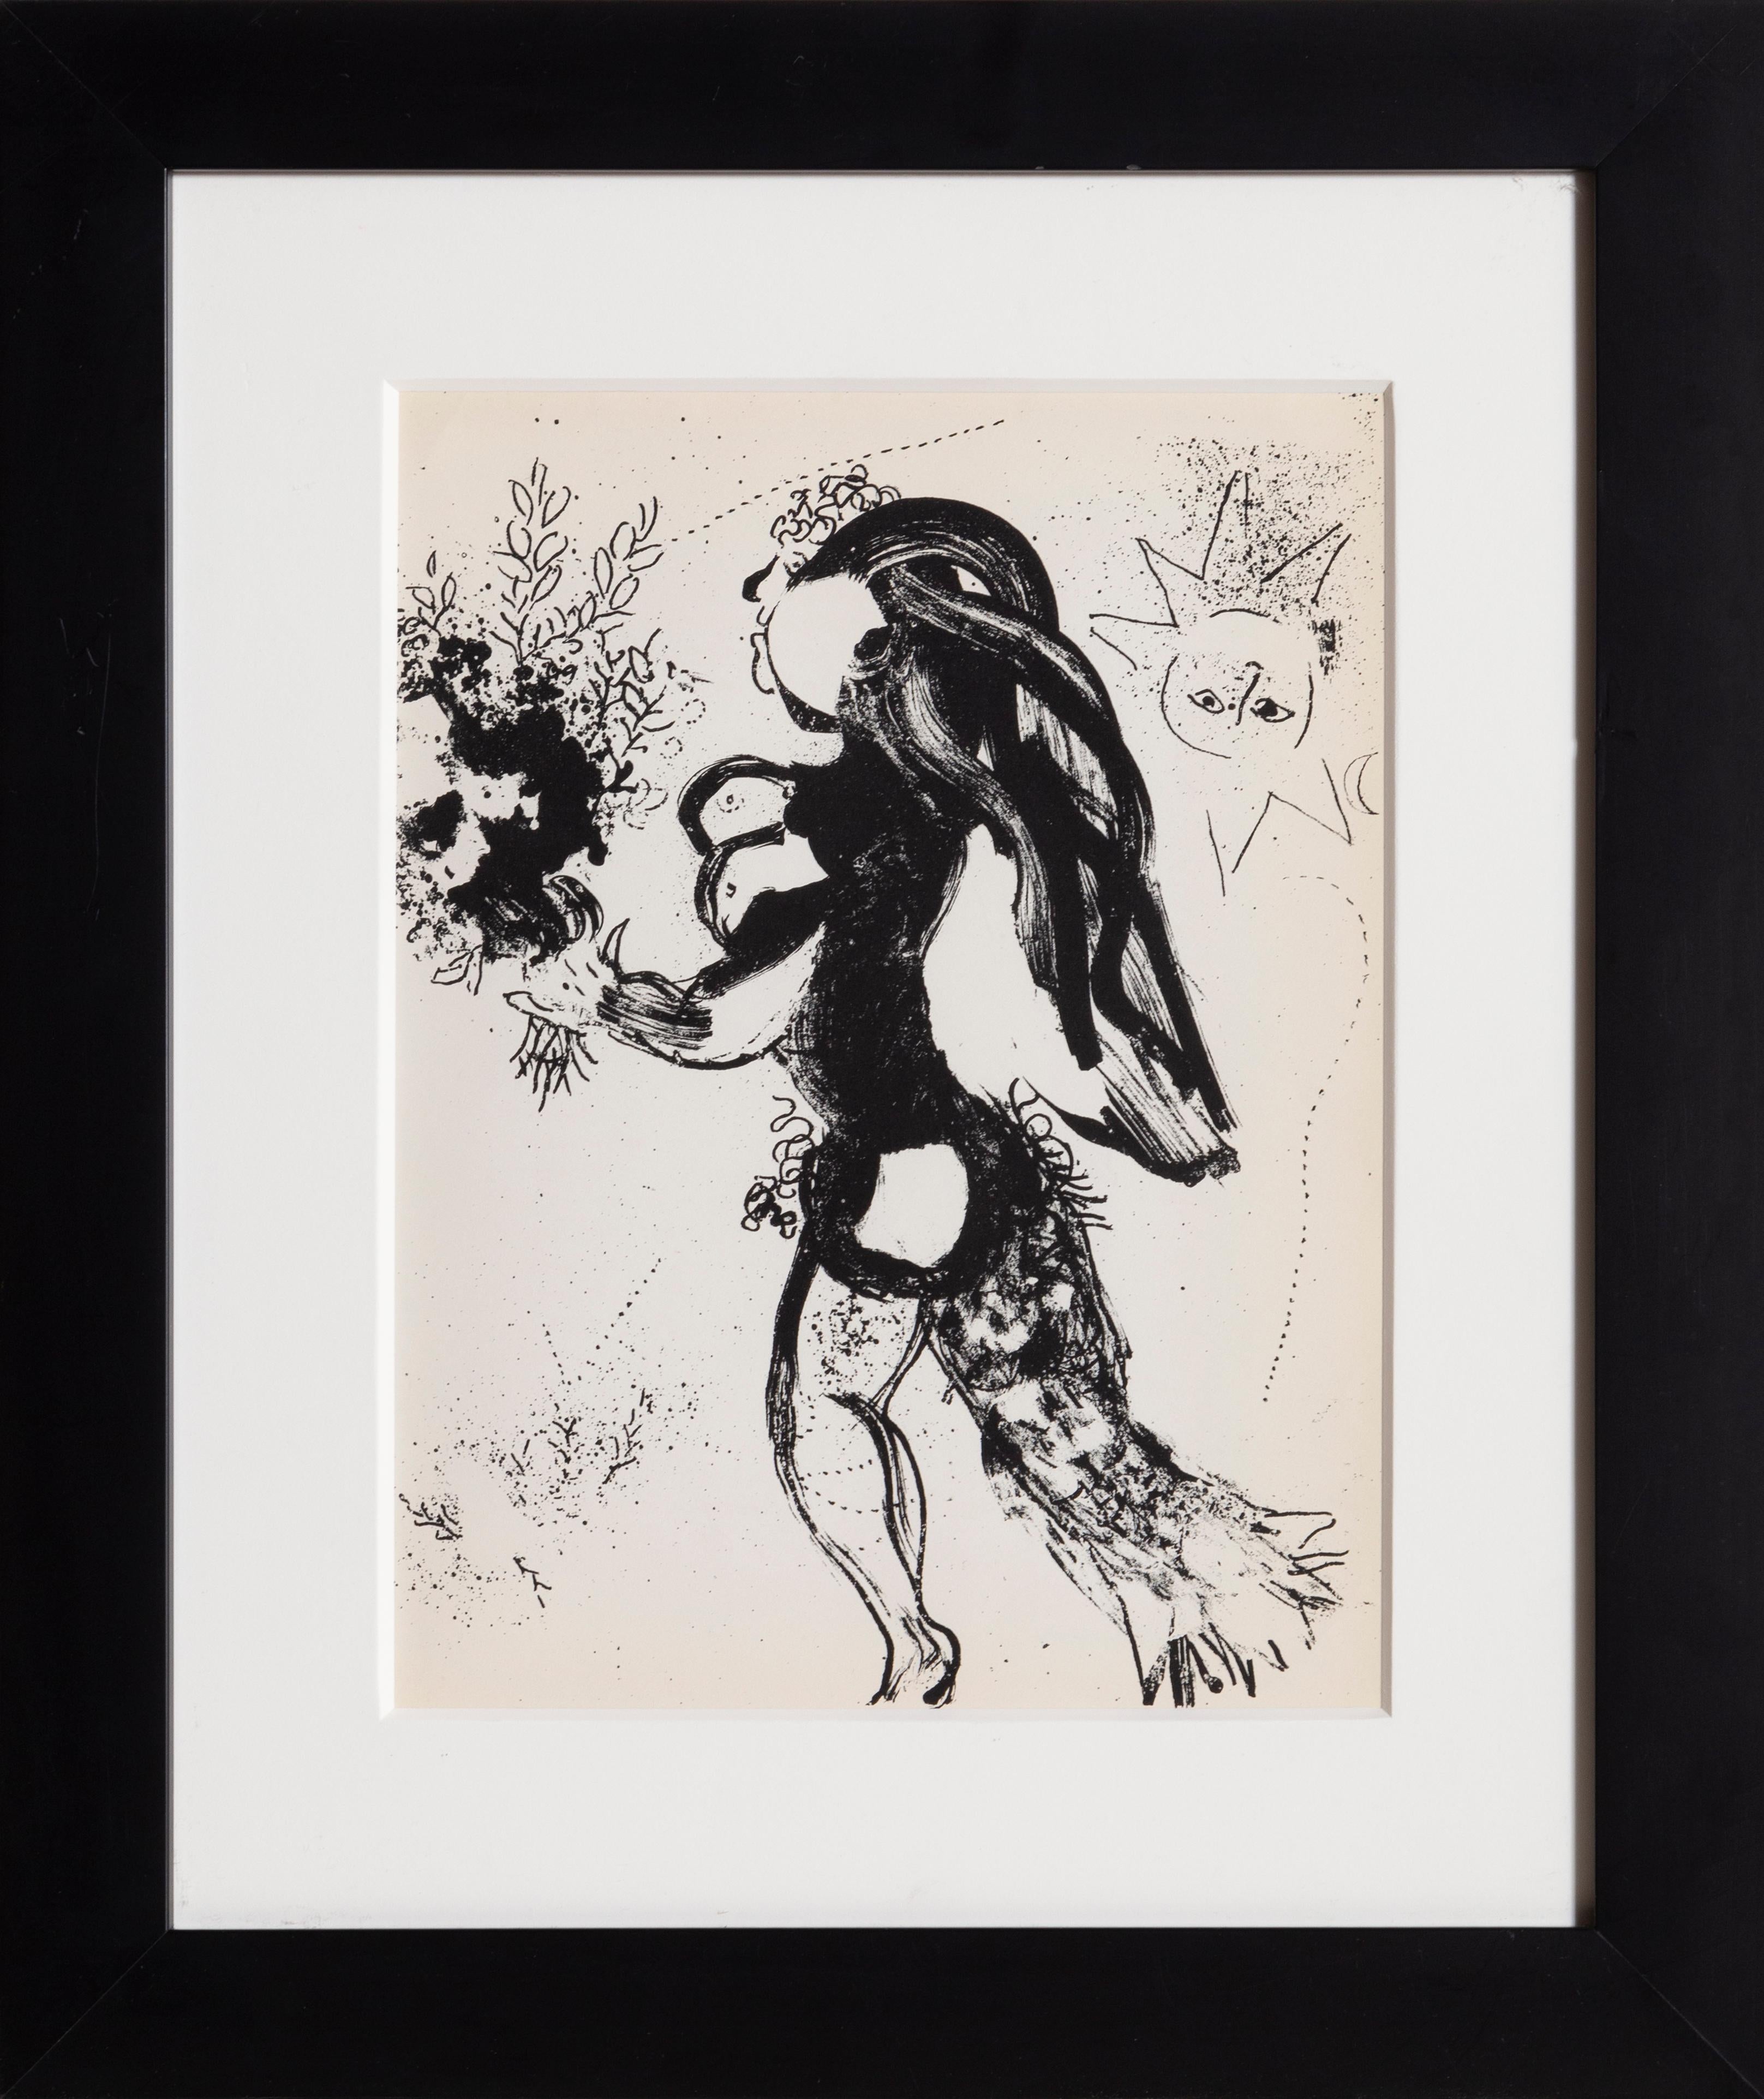 An impression from the book of Marc Chagall's (Russian, 1887-1985) lithographs. Published in 1960 by Éditions André Sauret, Monte-Carlo. From 1960 to 1974 Chagall produced 28 lithographs for the six volumes of the Lithographs Catalogue Raisonné.